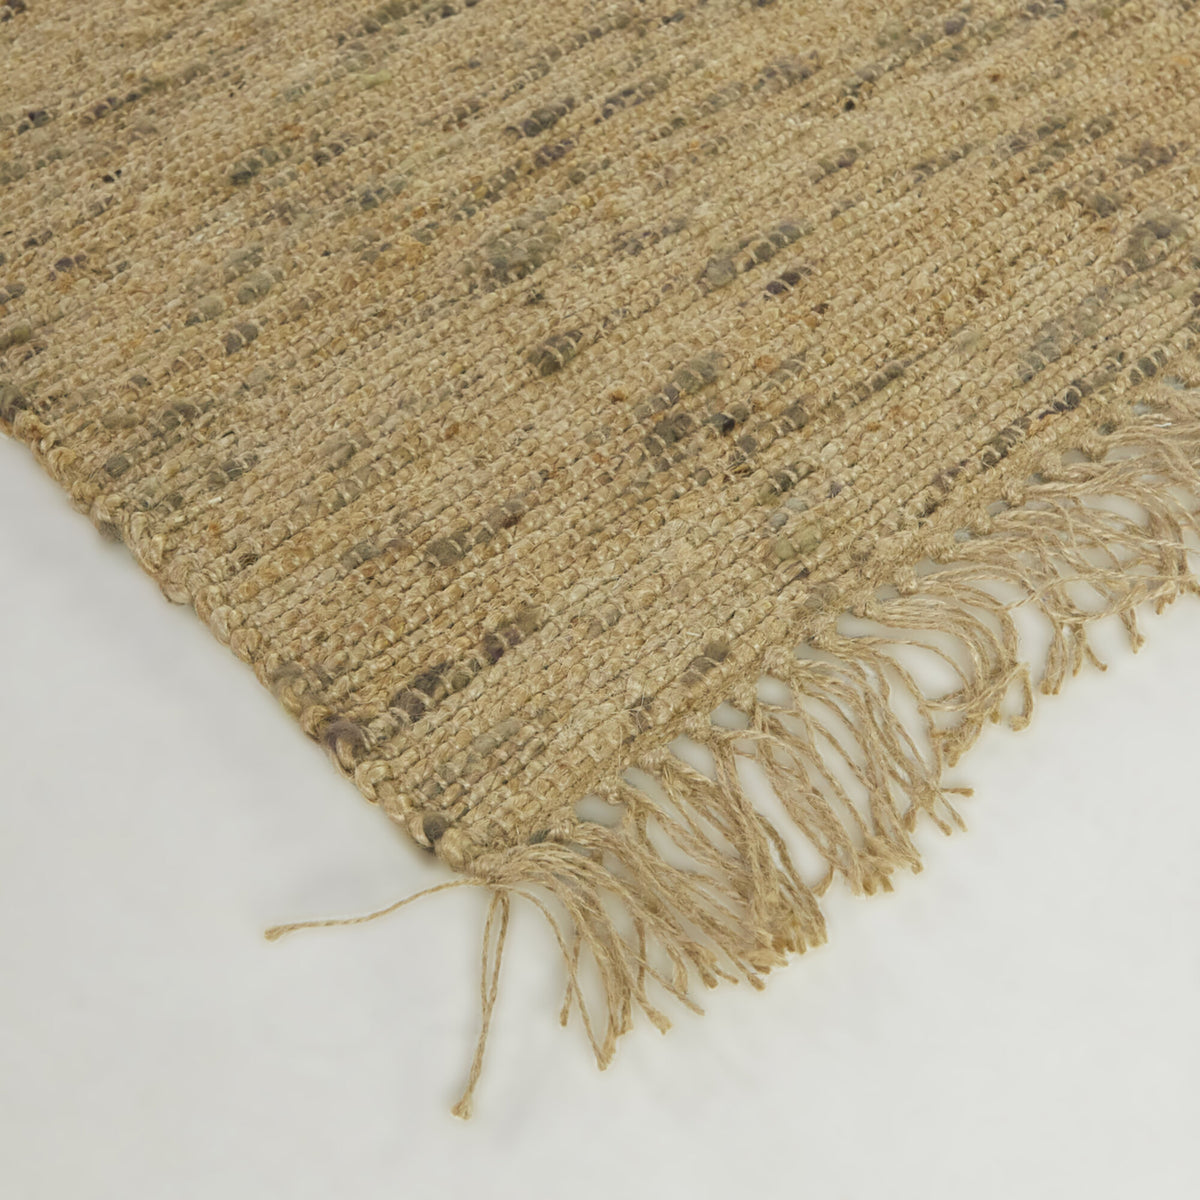 Deahl Textured Woven Area Rug